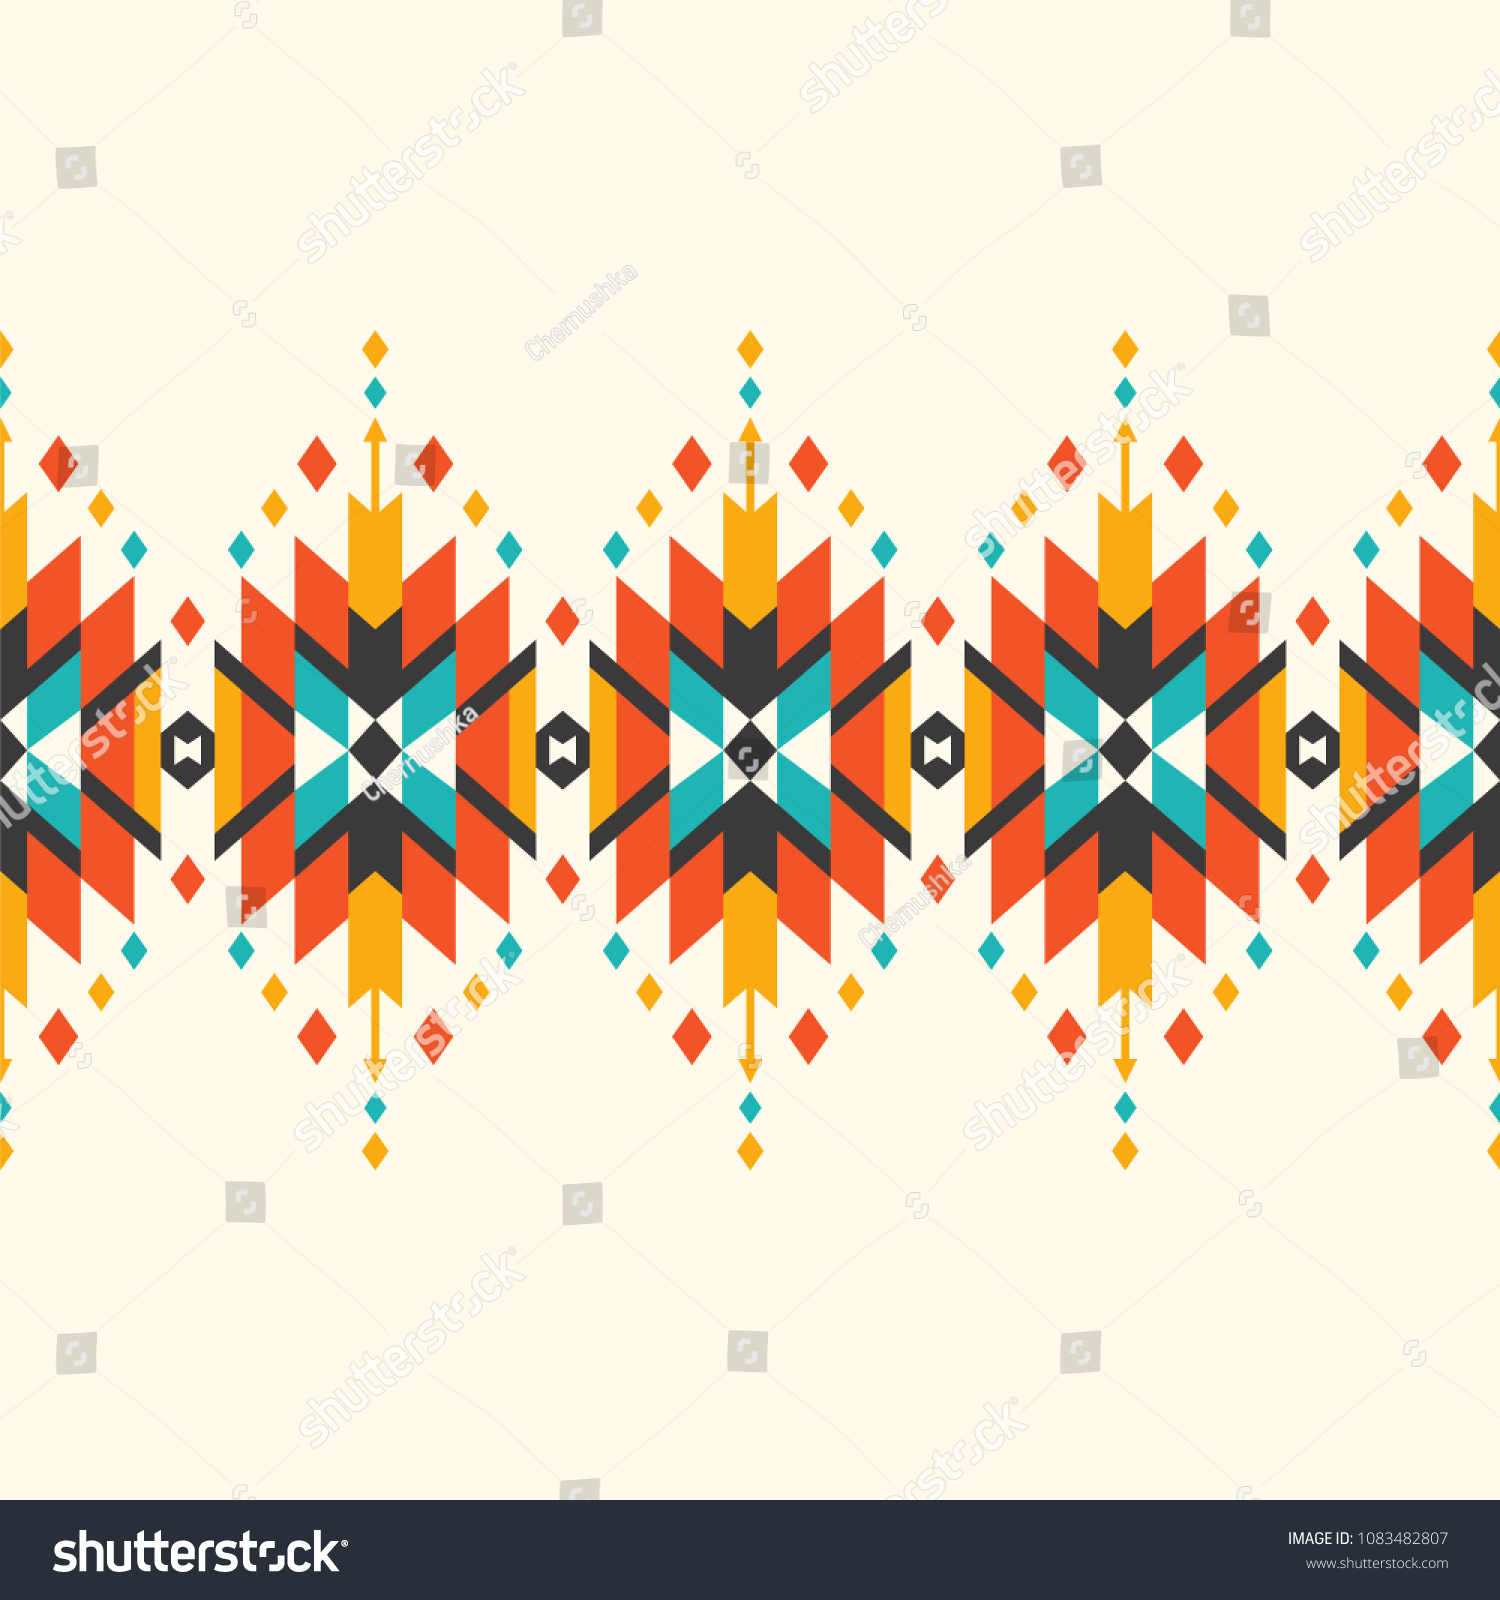 Native american indian designs images stock photos vectors